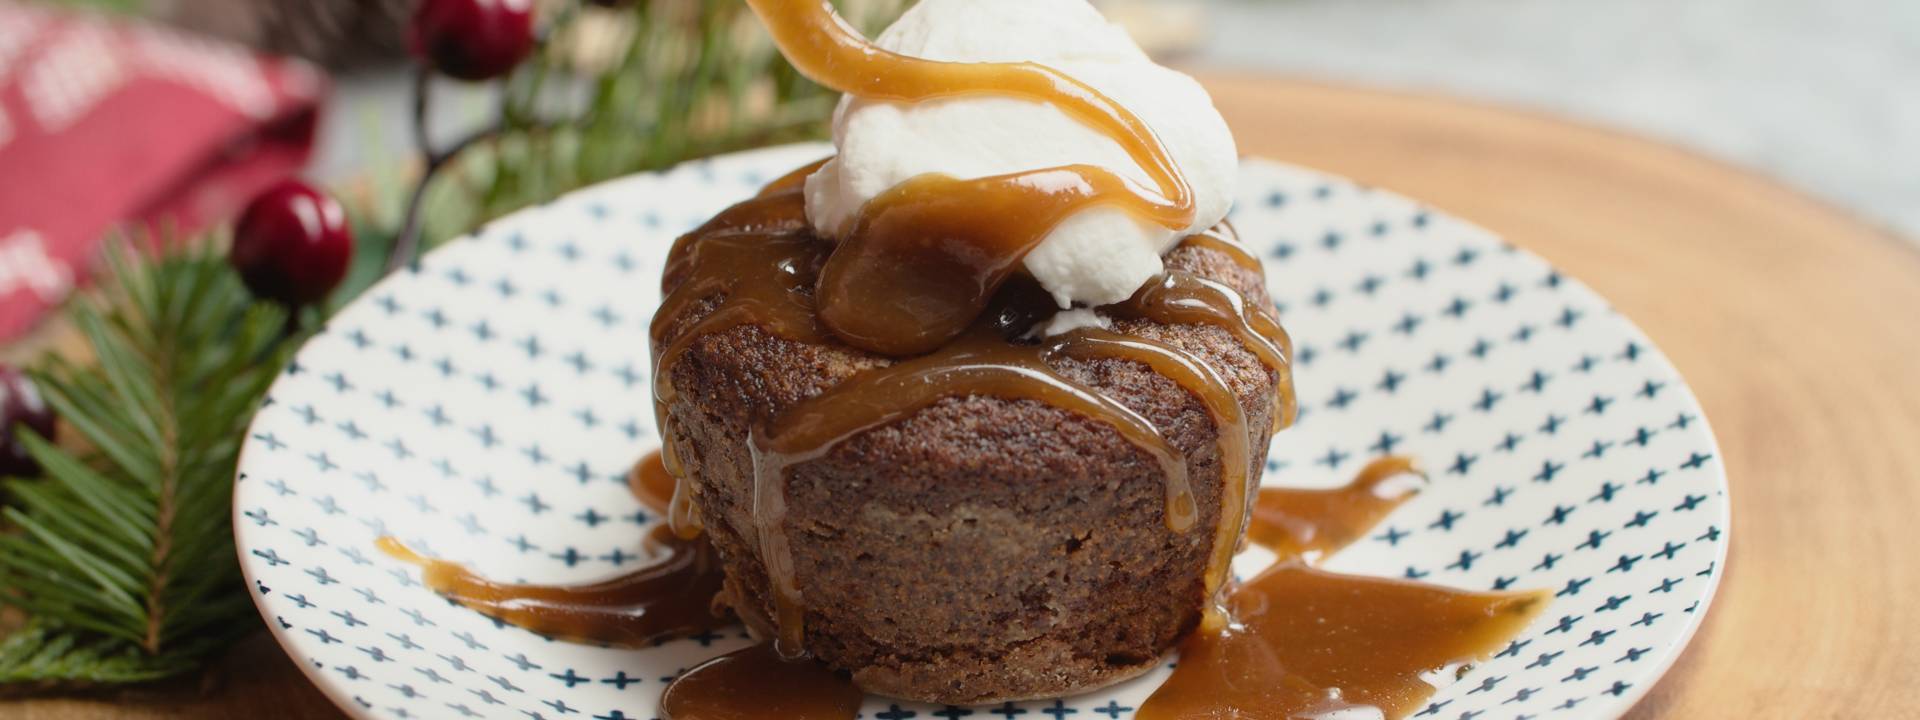 Sticky Toffee Pudding with Salted Caramel Sauce | Emi Cooks